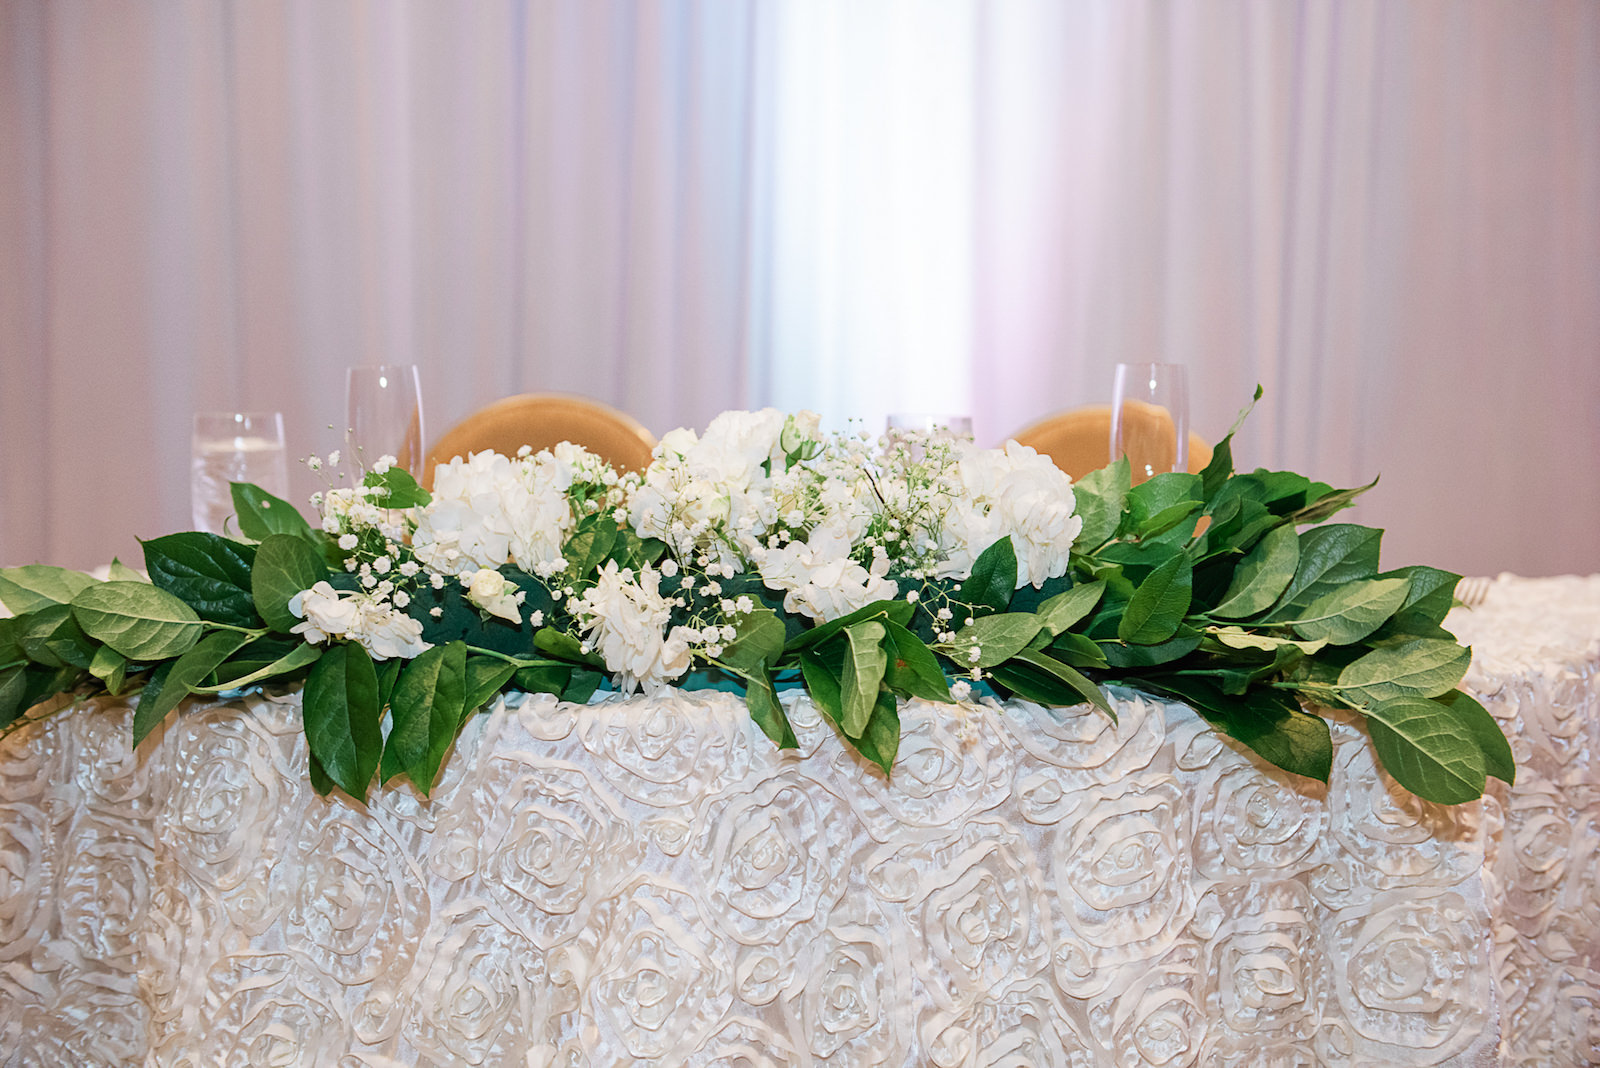 Sweetheart Table with White Embellished Linen and Greenery with White Florals